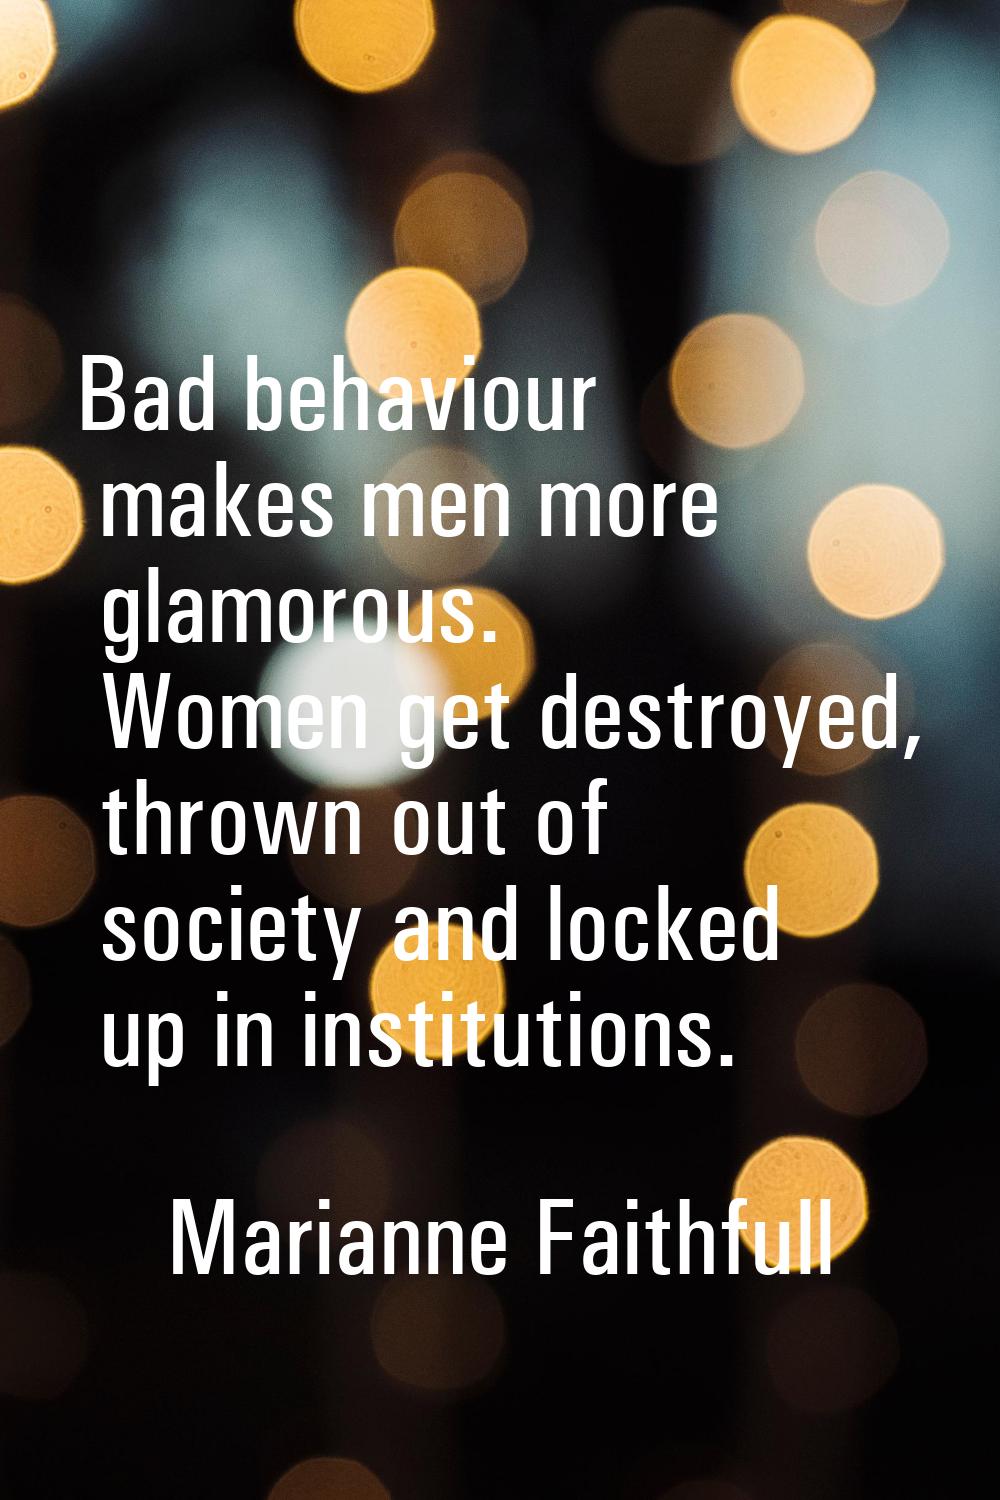 Bad behaviour makes men more glamorous. Women get destroyed, thrown out of society and locked up in